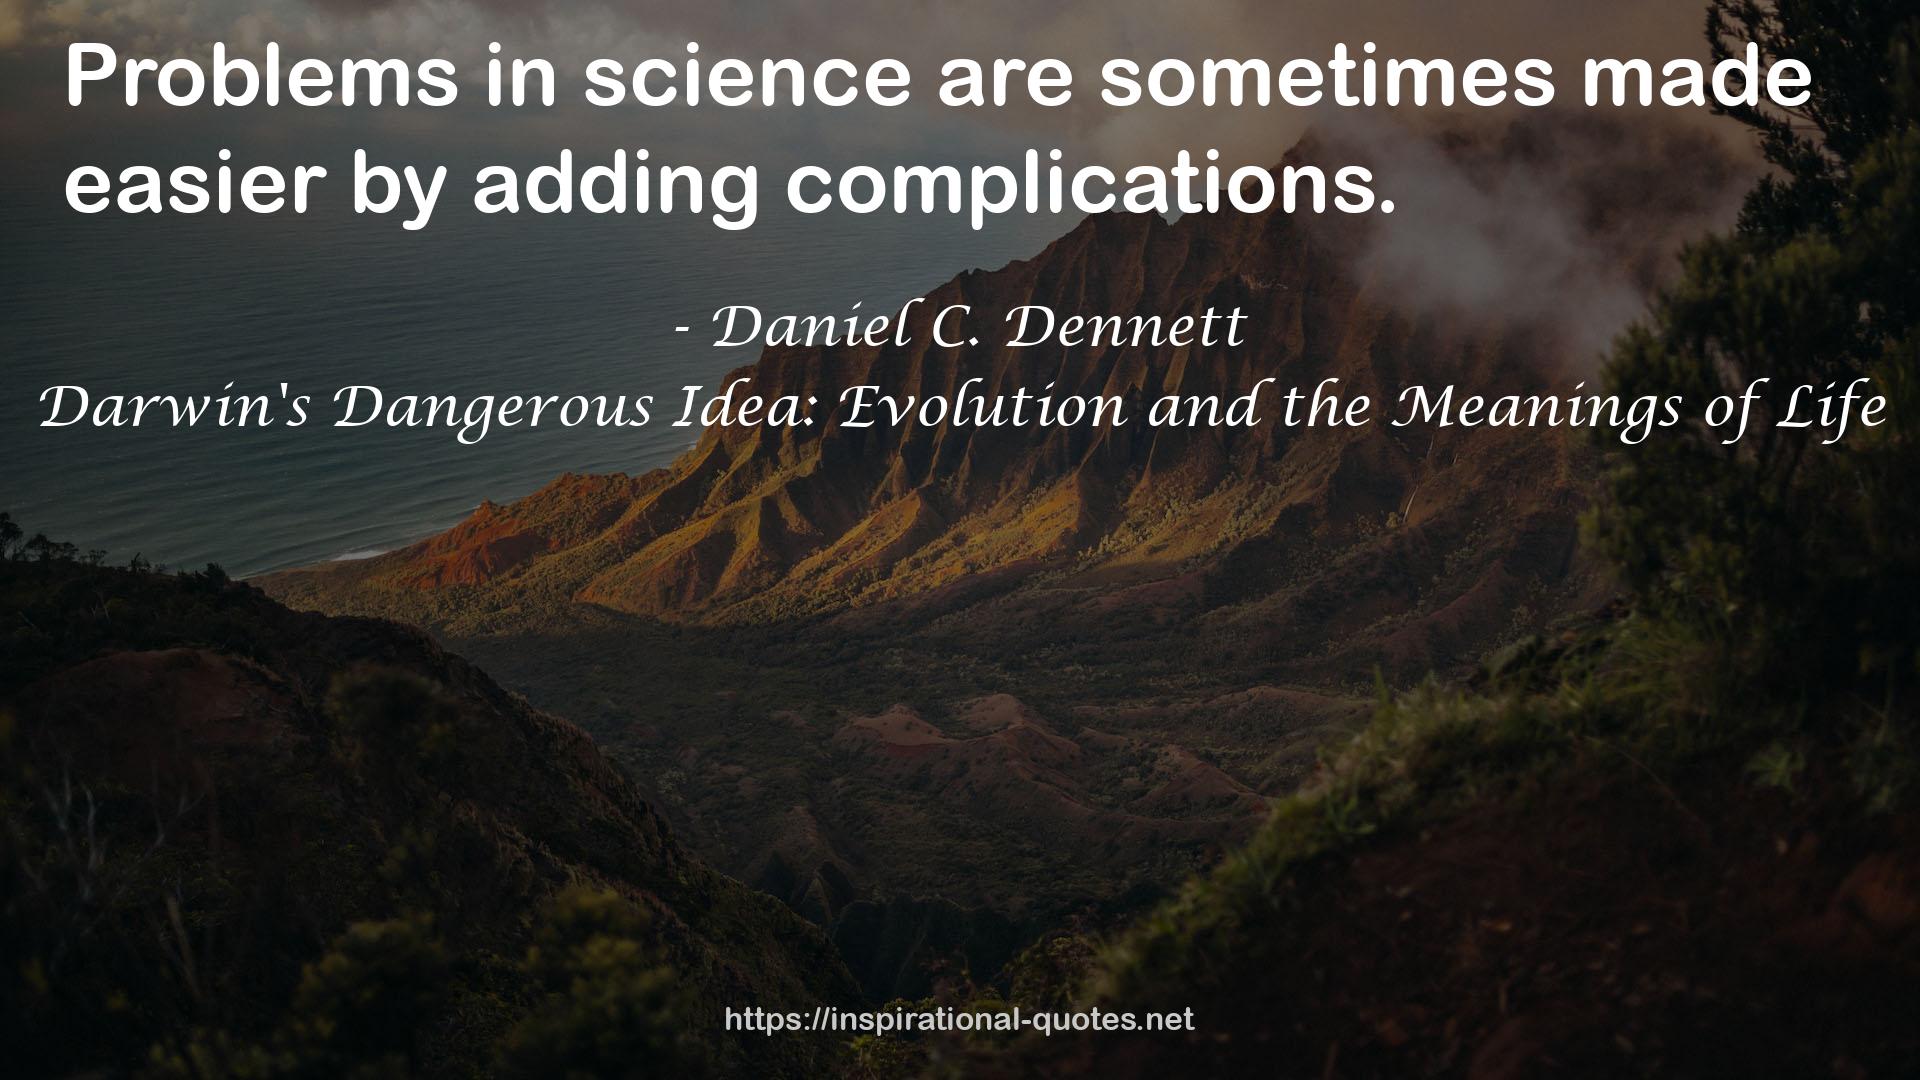 Darwin's Dangerous Idea: Evolution and the Meanings of Life QUOTES